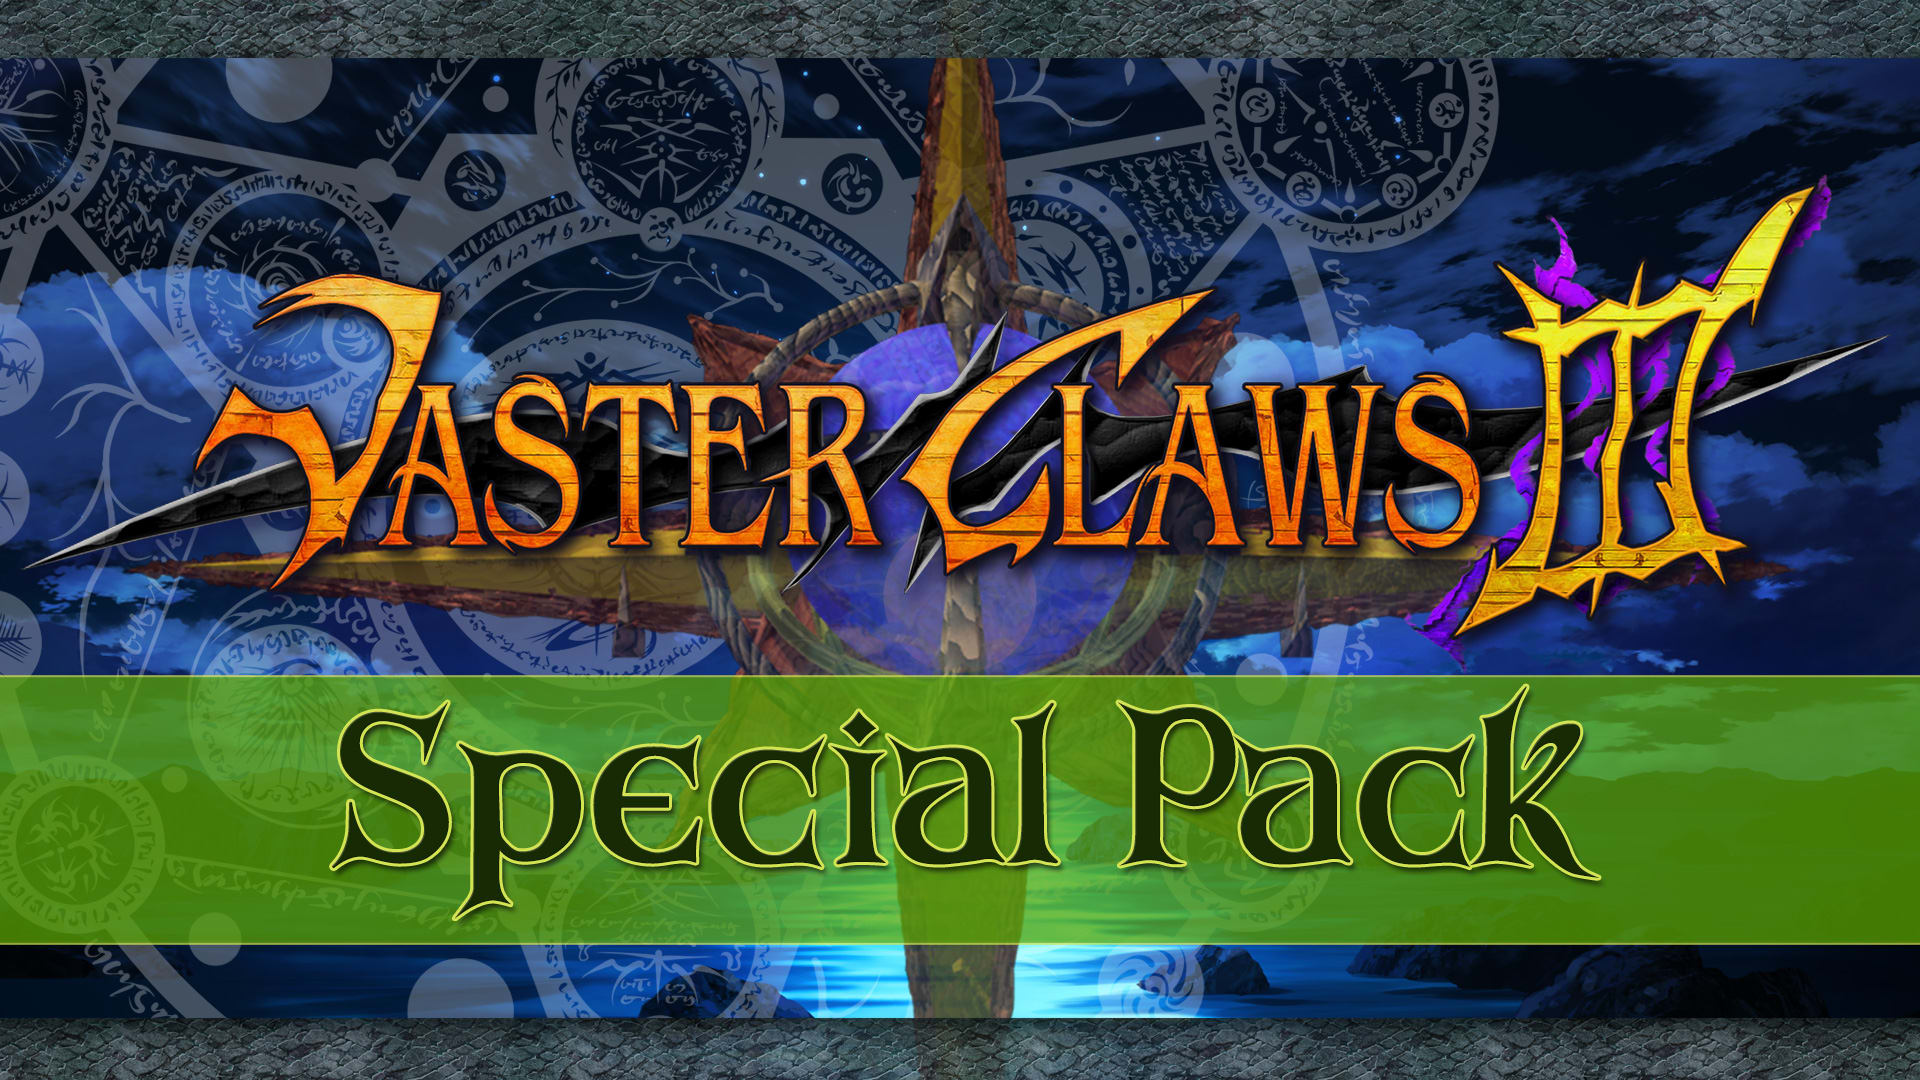 VasterClaws 3 Special Pack